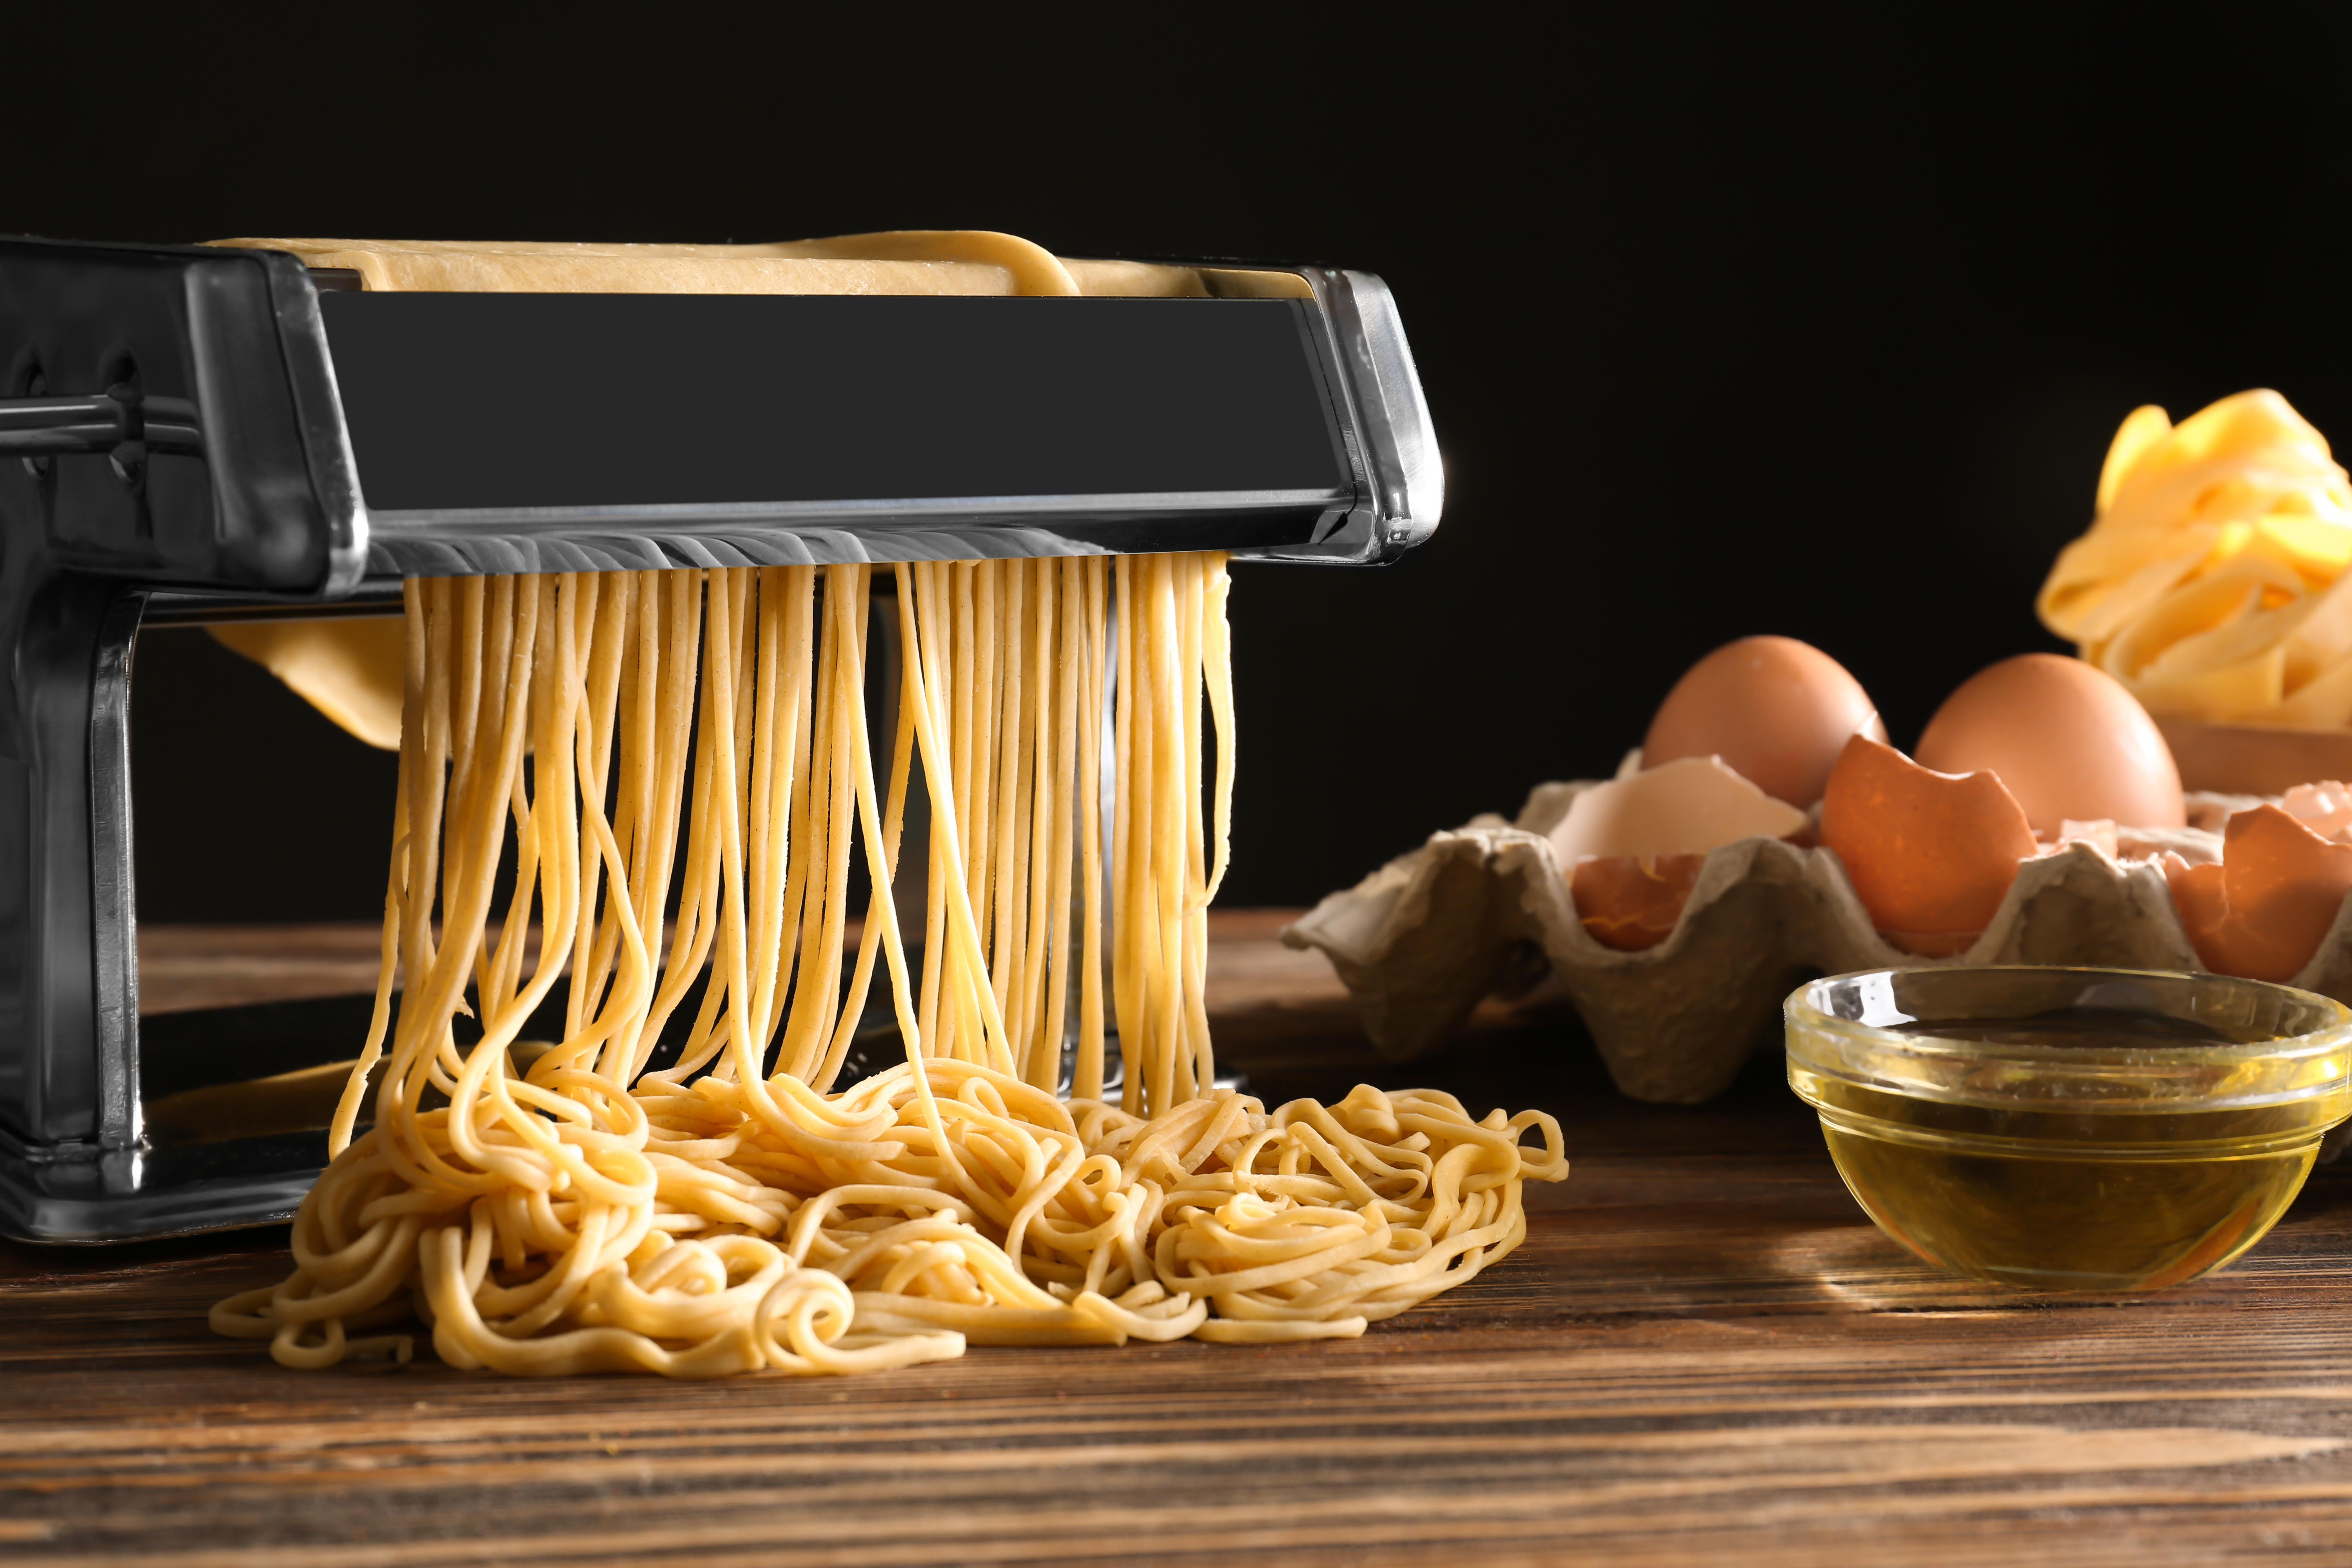 Top 5 Best Electric Pasta Maker For The Money in 2023 